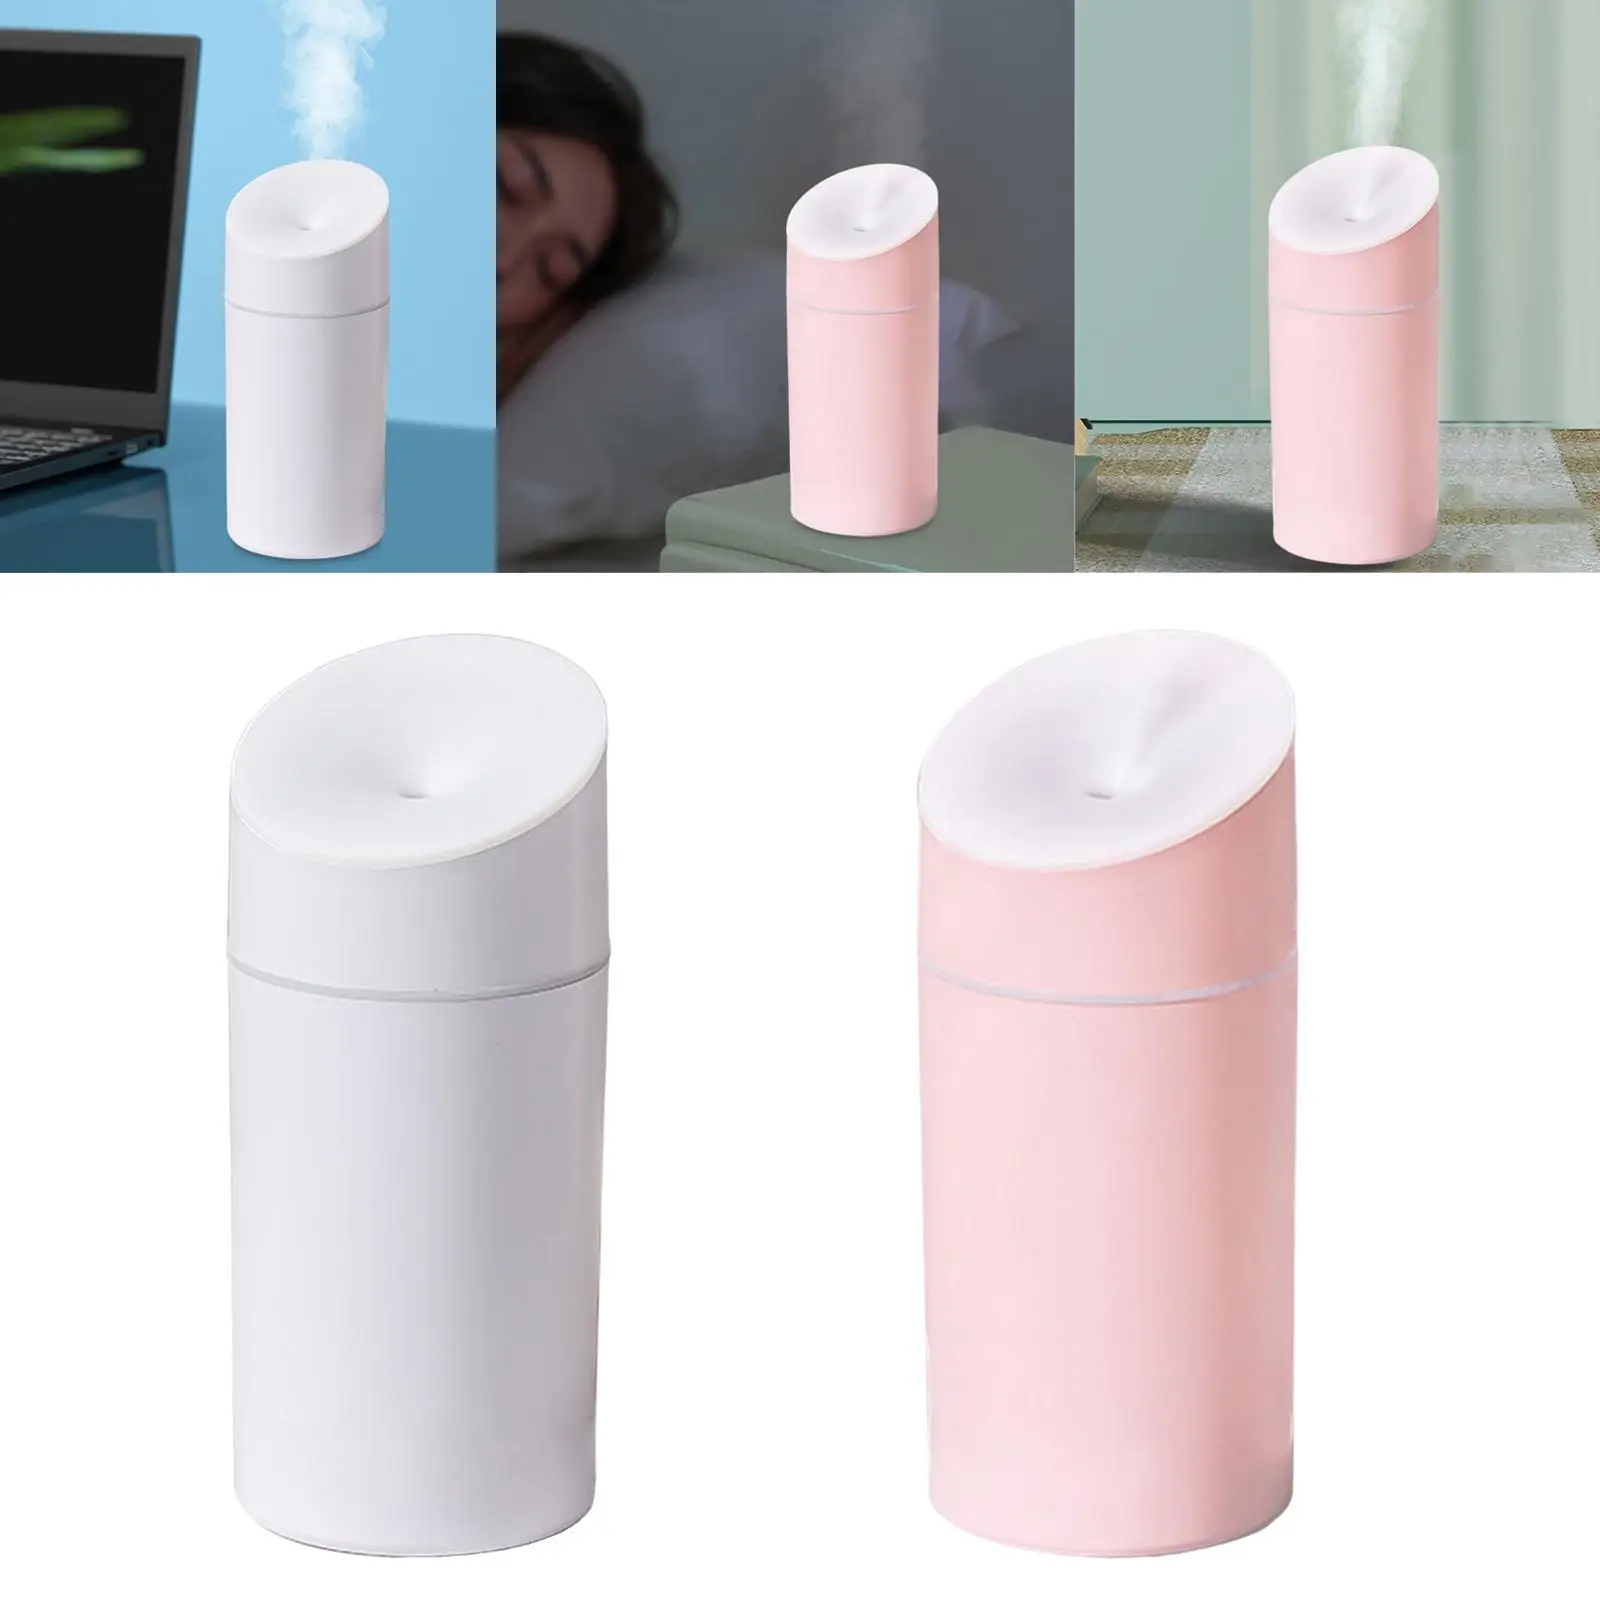 Mini Air Humidifier USB with Night Light Quiet Operation Fogger mist essential Oil Diffuser Sprayer for Office Yoga